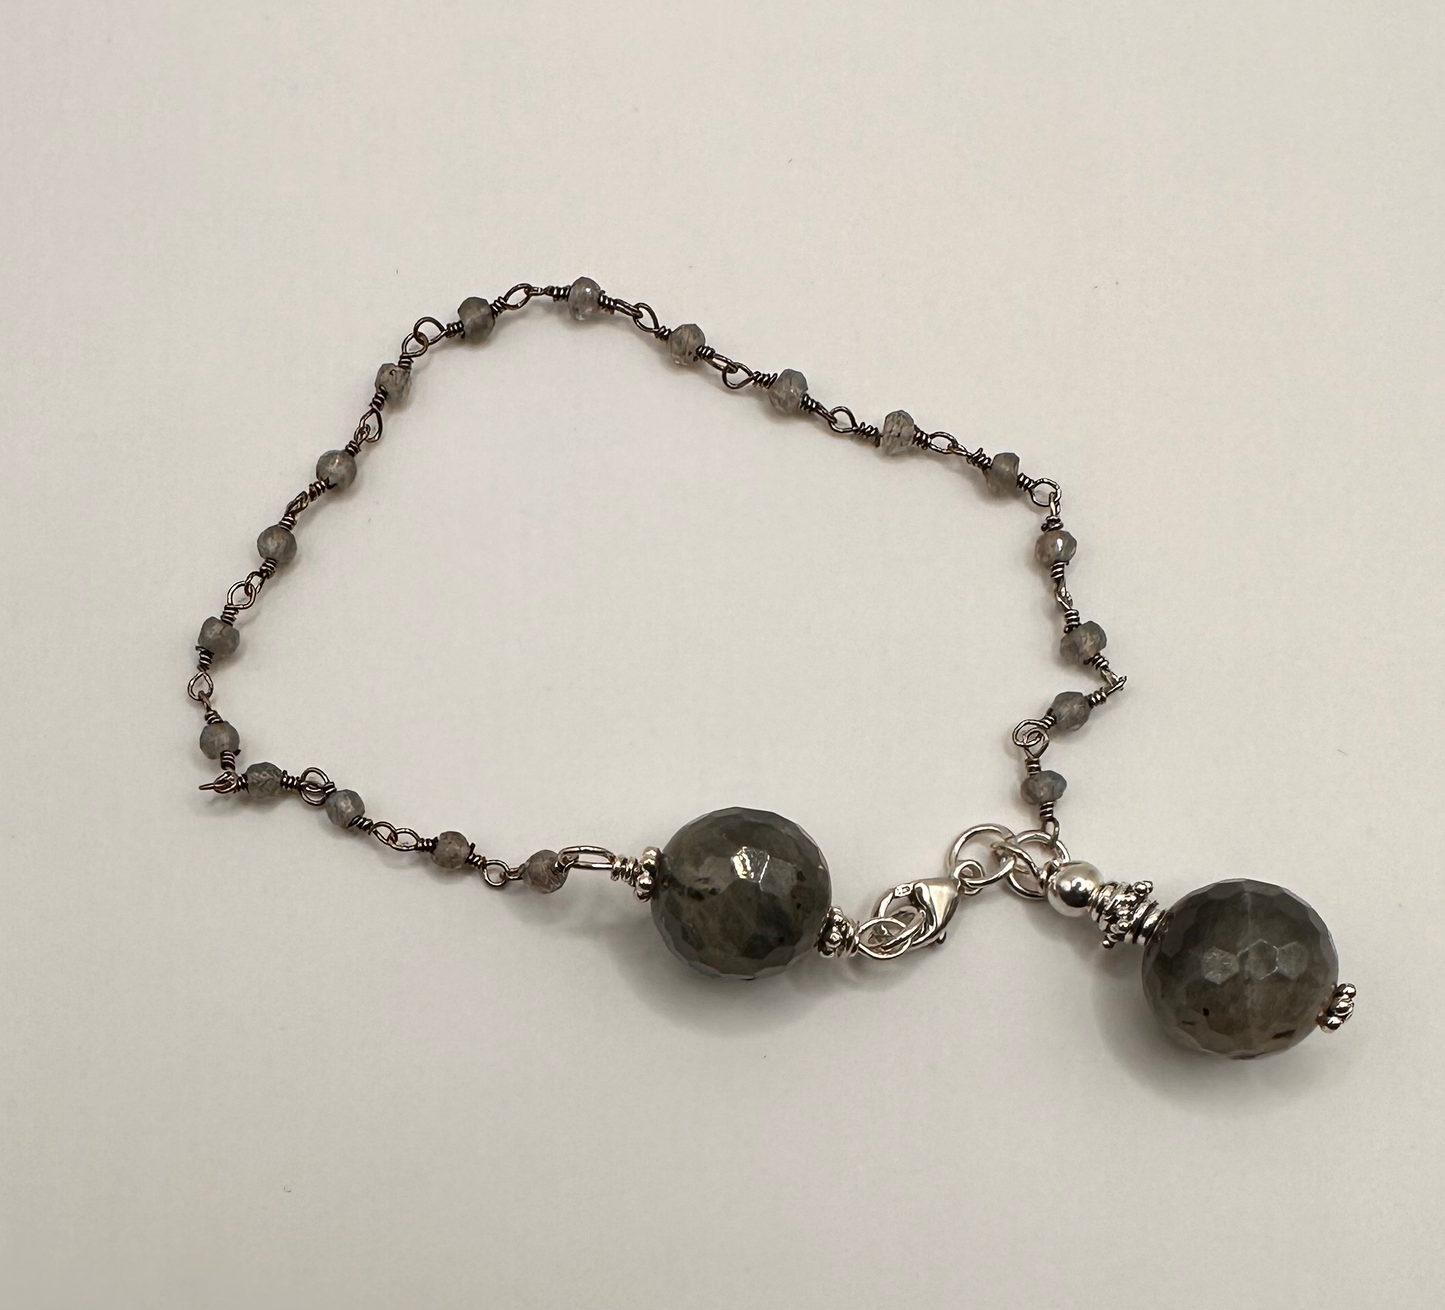 Labradorite Chain with Sterling Silver Bead Charm Bracelet